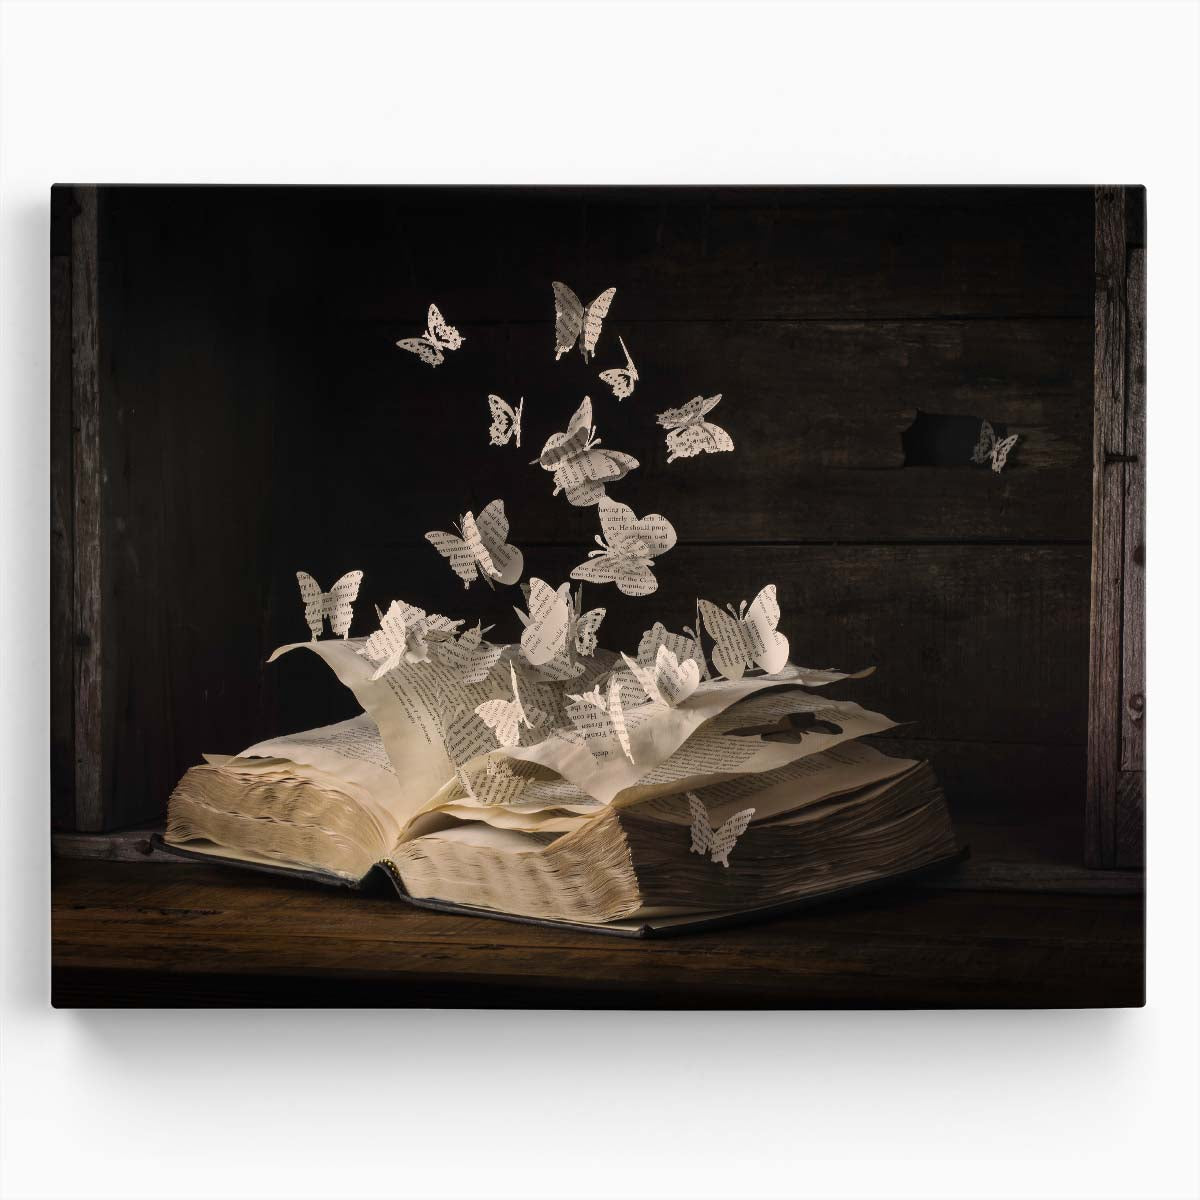 Surreal Butterfly Fantasy Origami Flight Photography Wall Art by Luxuriance Designs. Made in USA.